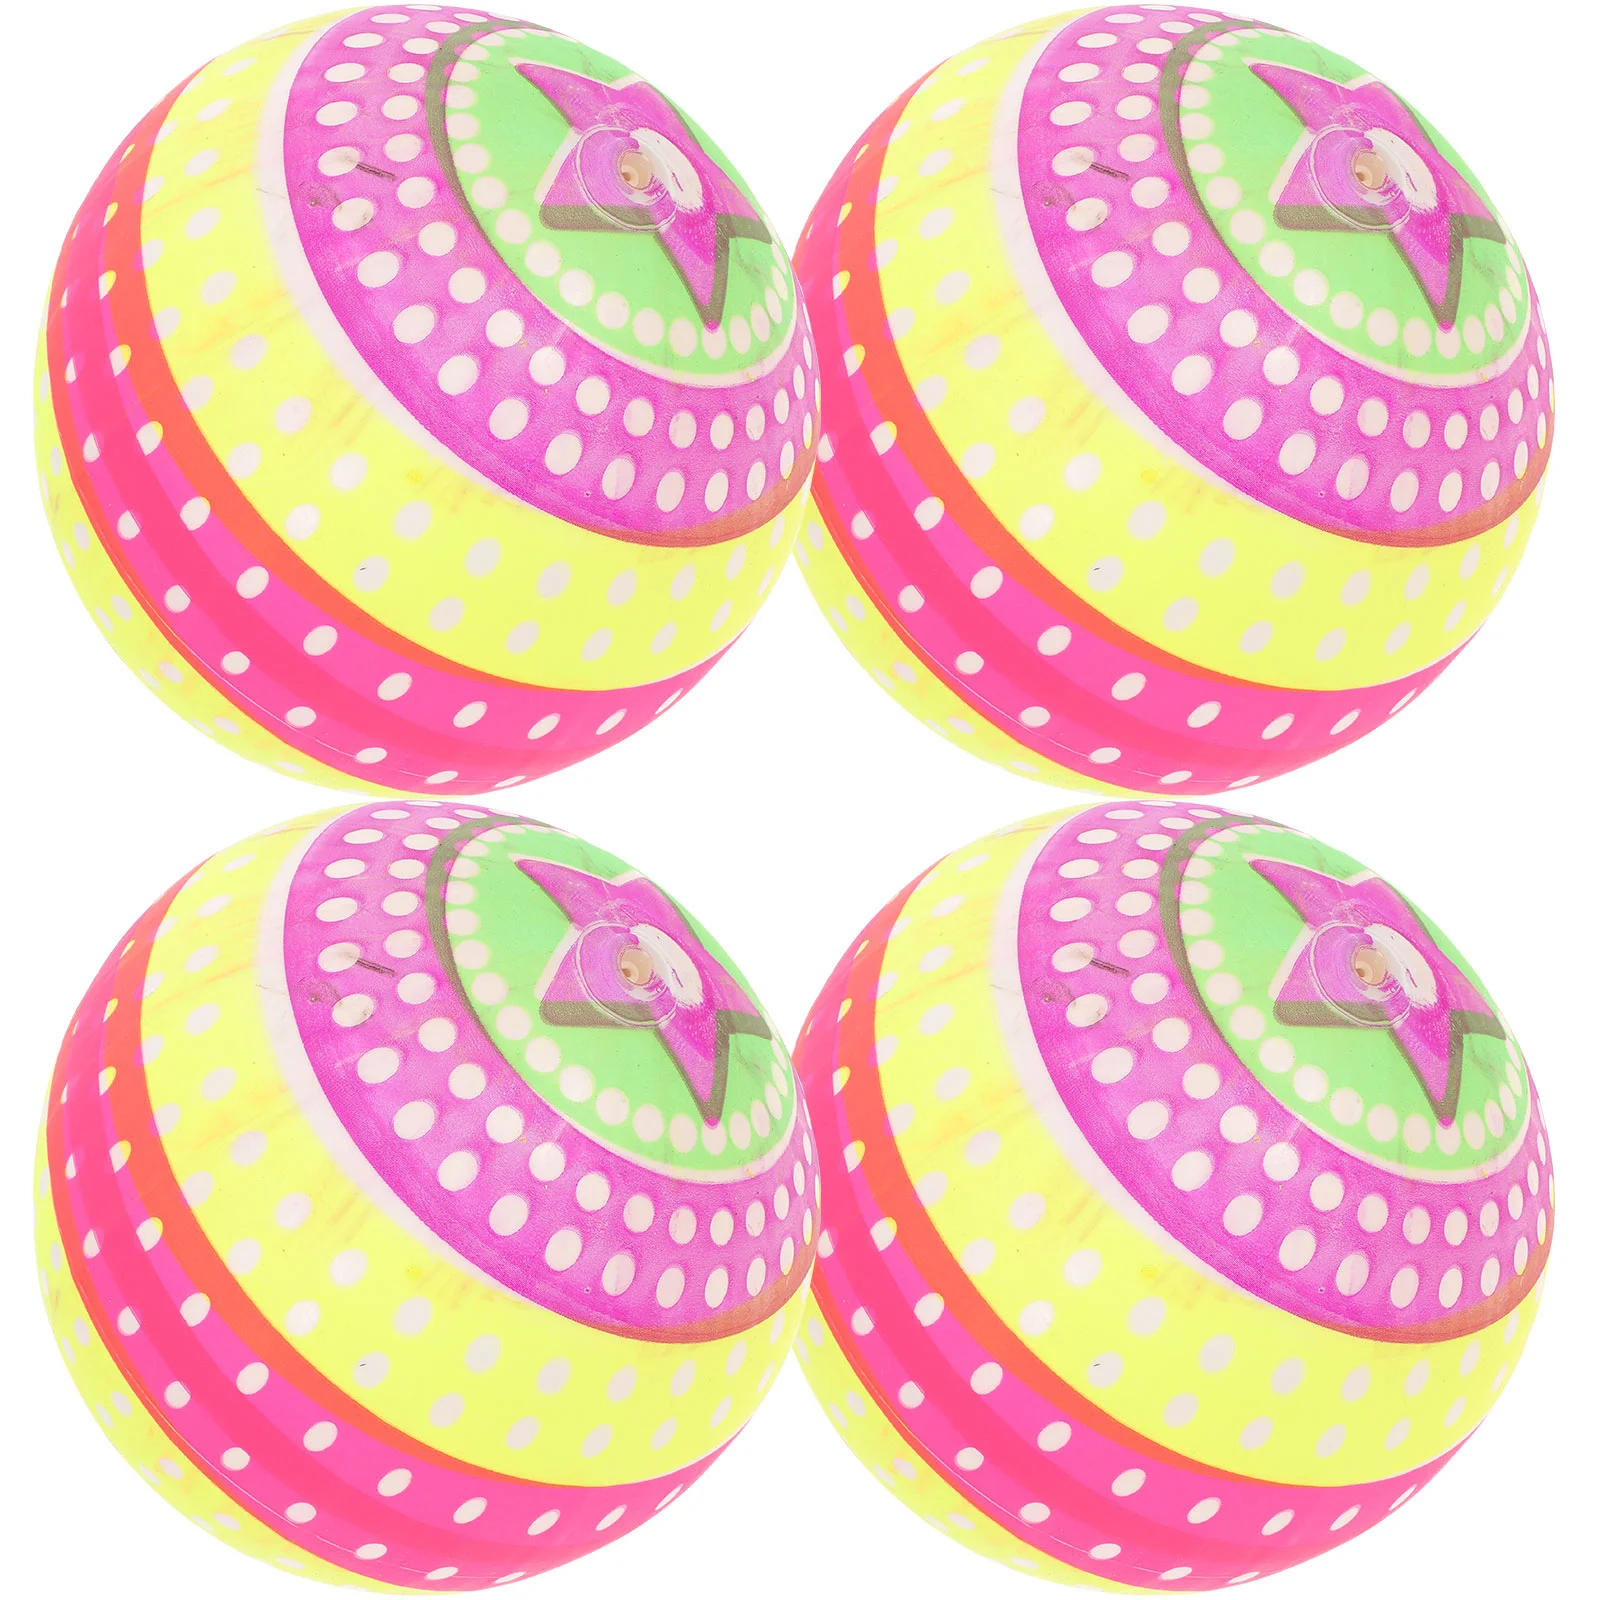 Ummer toys beach ball party balls pool pvc inflatable for fluorescent volleyballs child thumb200